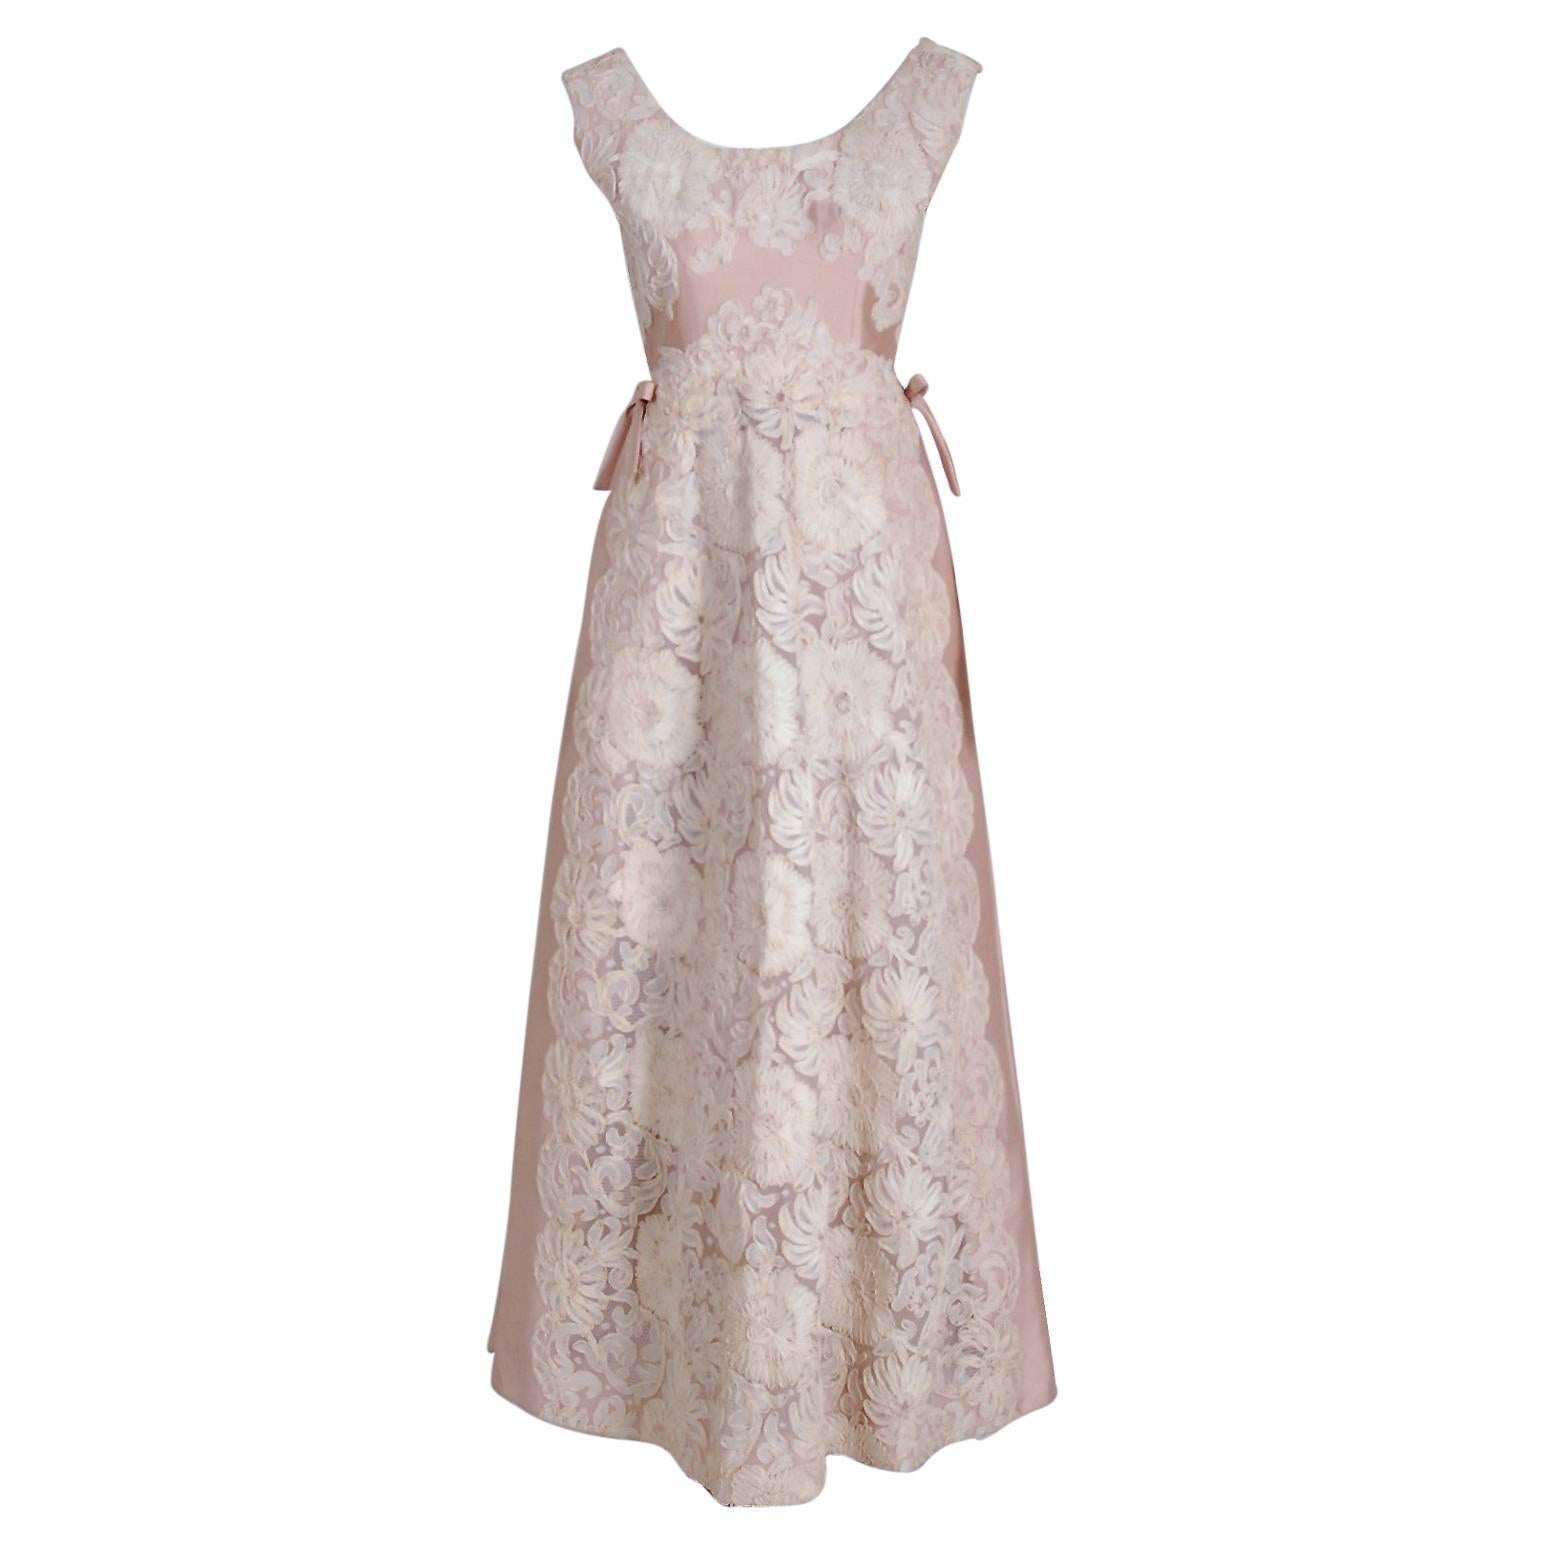 1966 Pierre Balmain Haute-Couture Blush Pink Embroidered Floral Silk Lace Gown